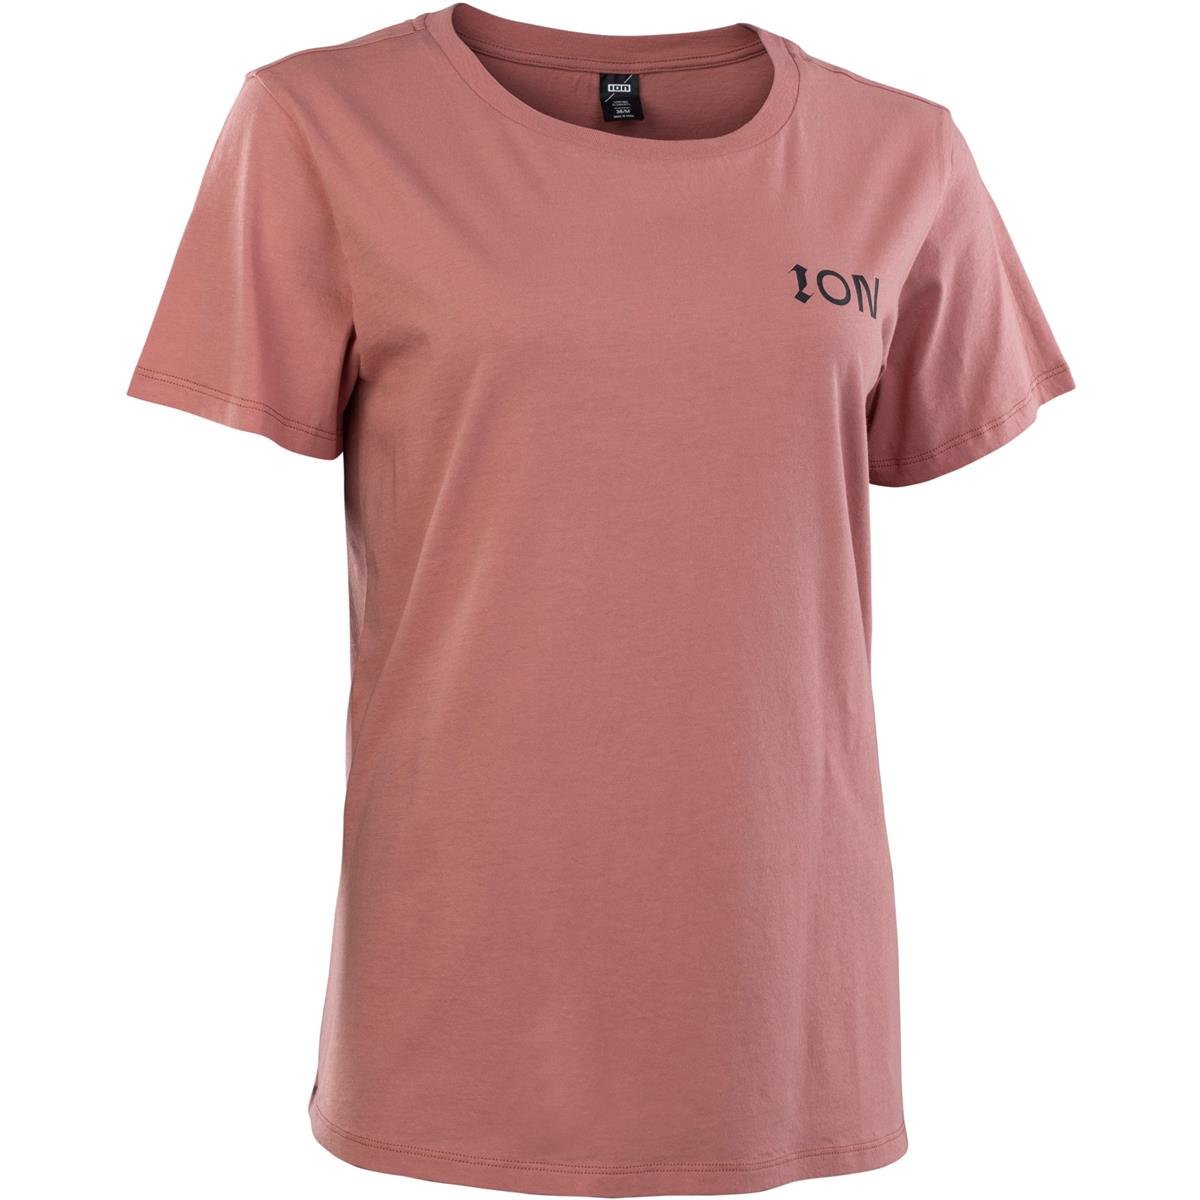 ION Femme T-Shirt Stoked Utah Red